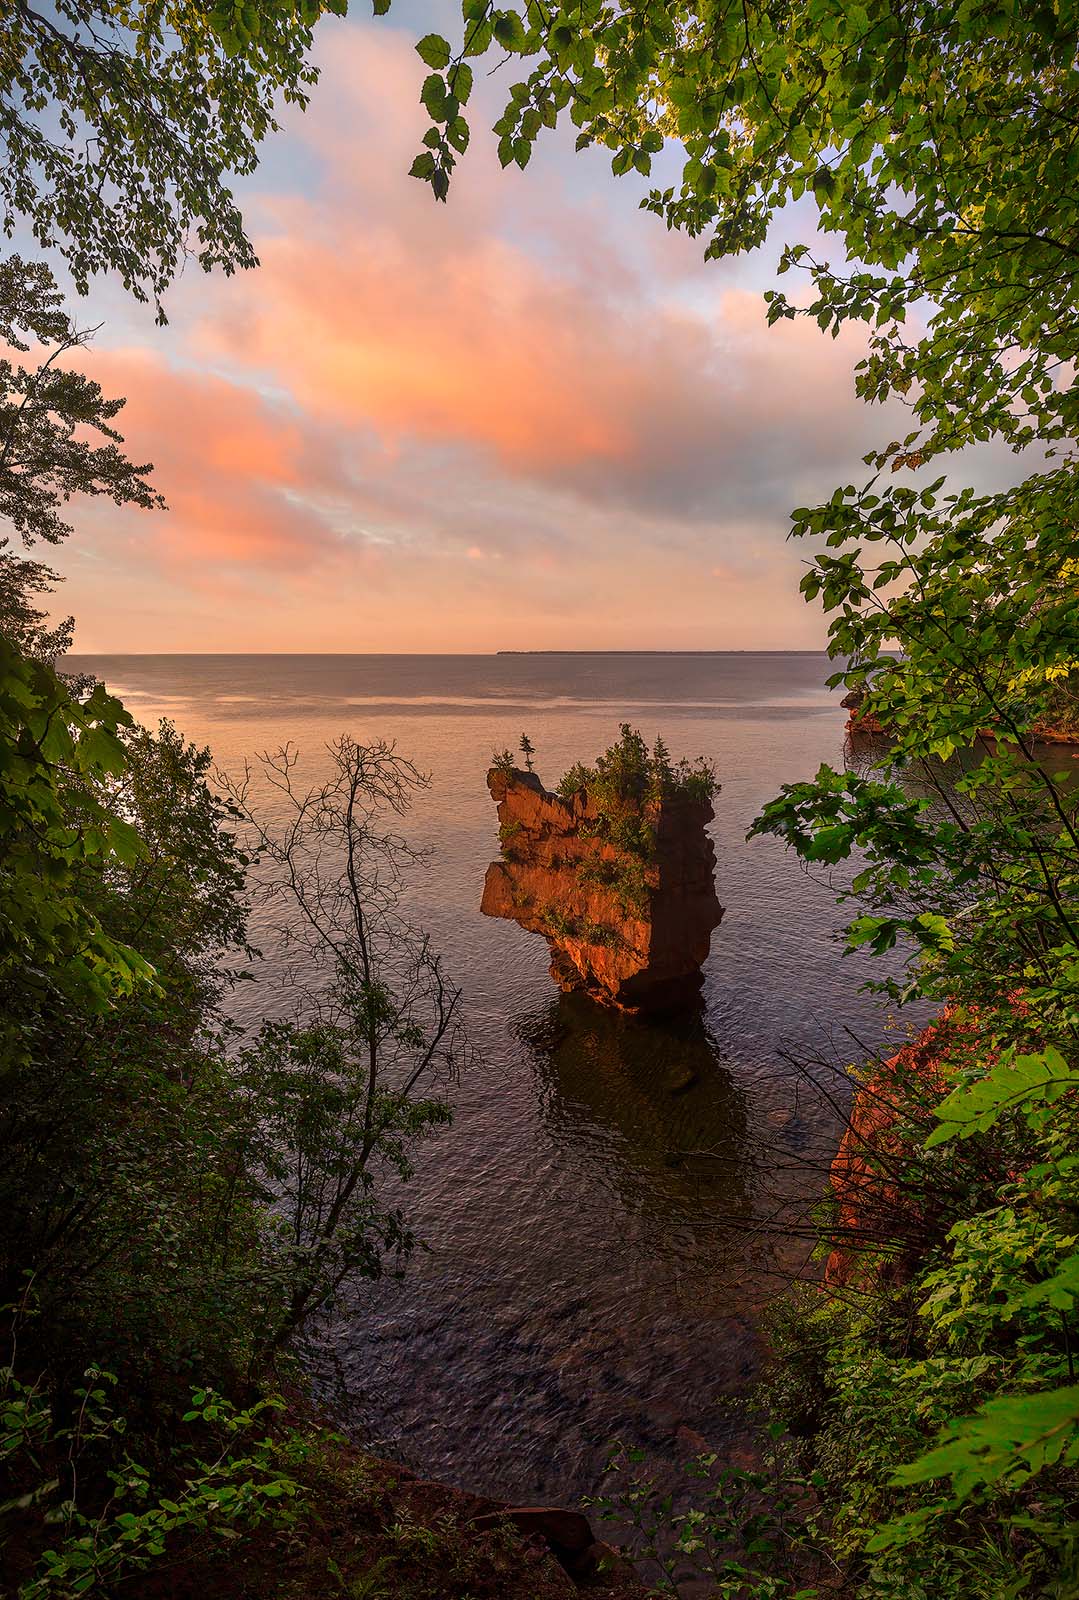 summer sunrise from high above the sandstone cliffs on stockton island in the apostle islands national lakeshore